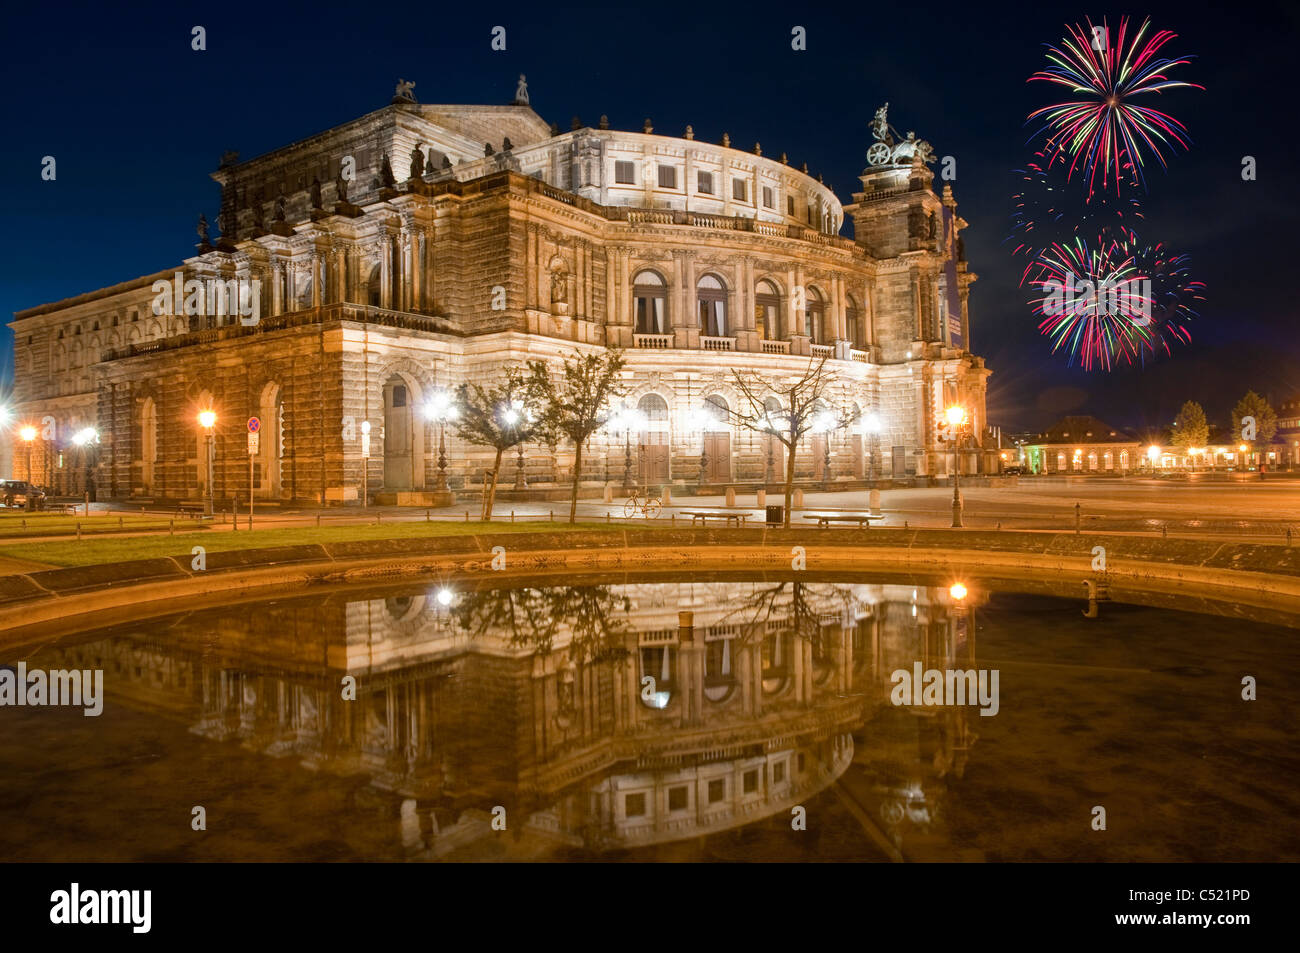 Semperoper opera house at night with fireworks, Dresden, Saxony, Germany, Europe Stock Photo